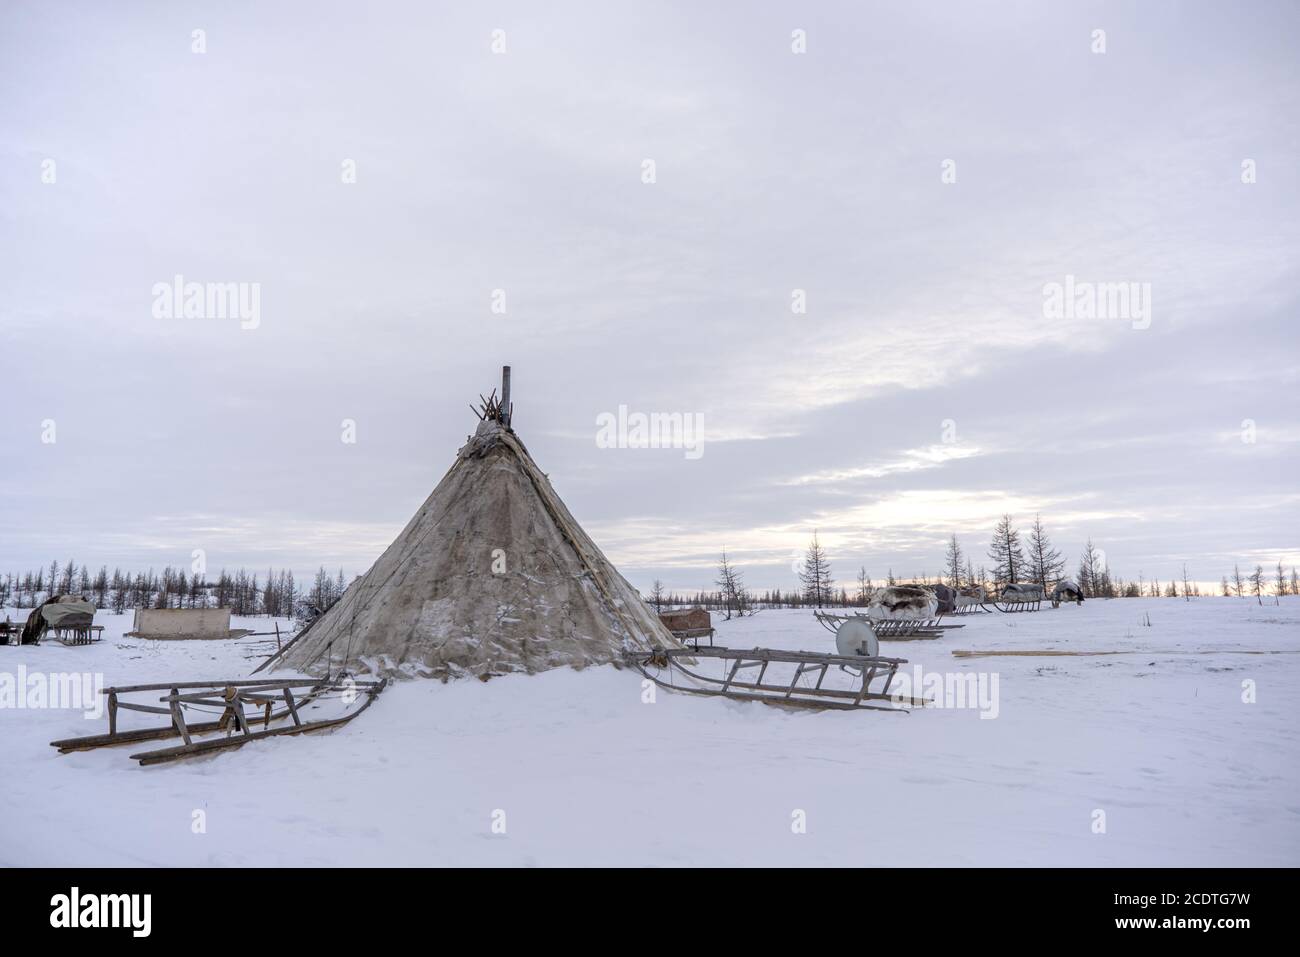 A chum (Nenet traditional tent covered with reindeer hides) in the snowy tundra, Yamalo-Nenets Autonomous Okrug, Russia Stock Photo